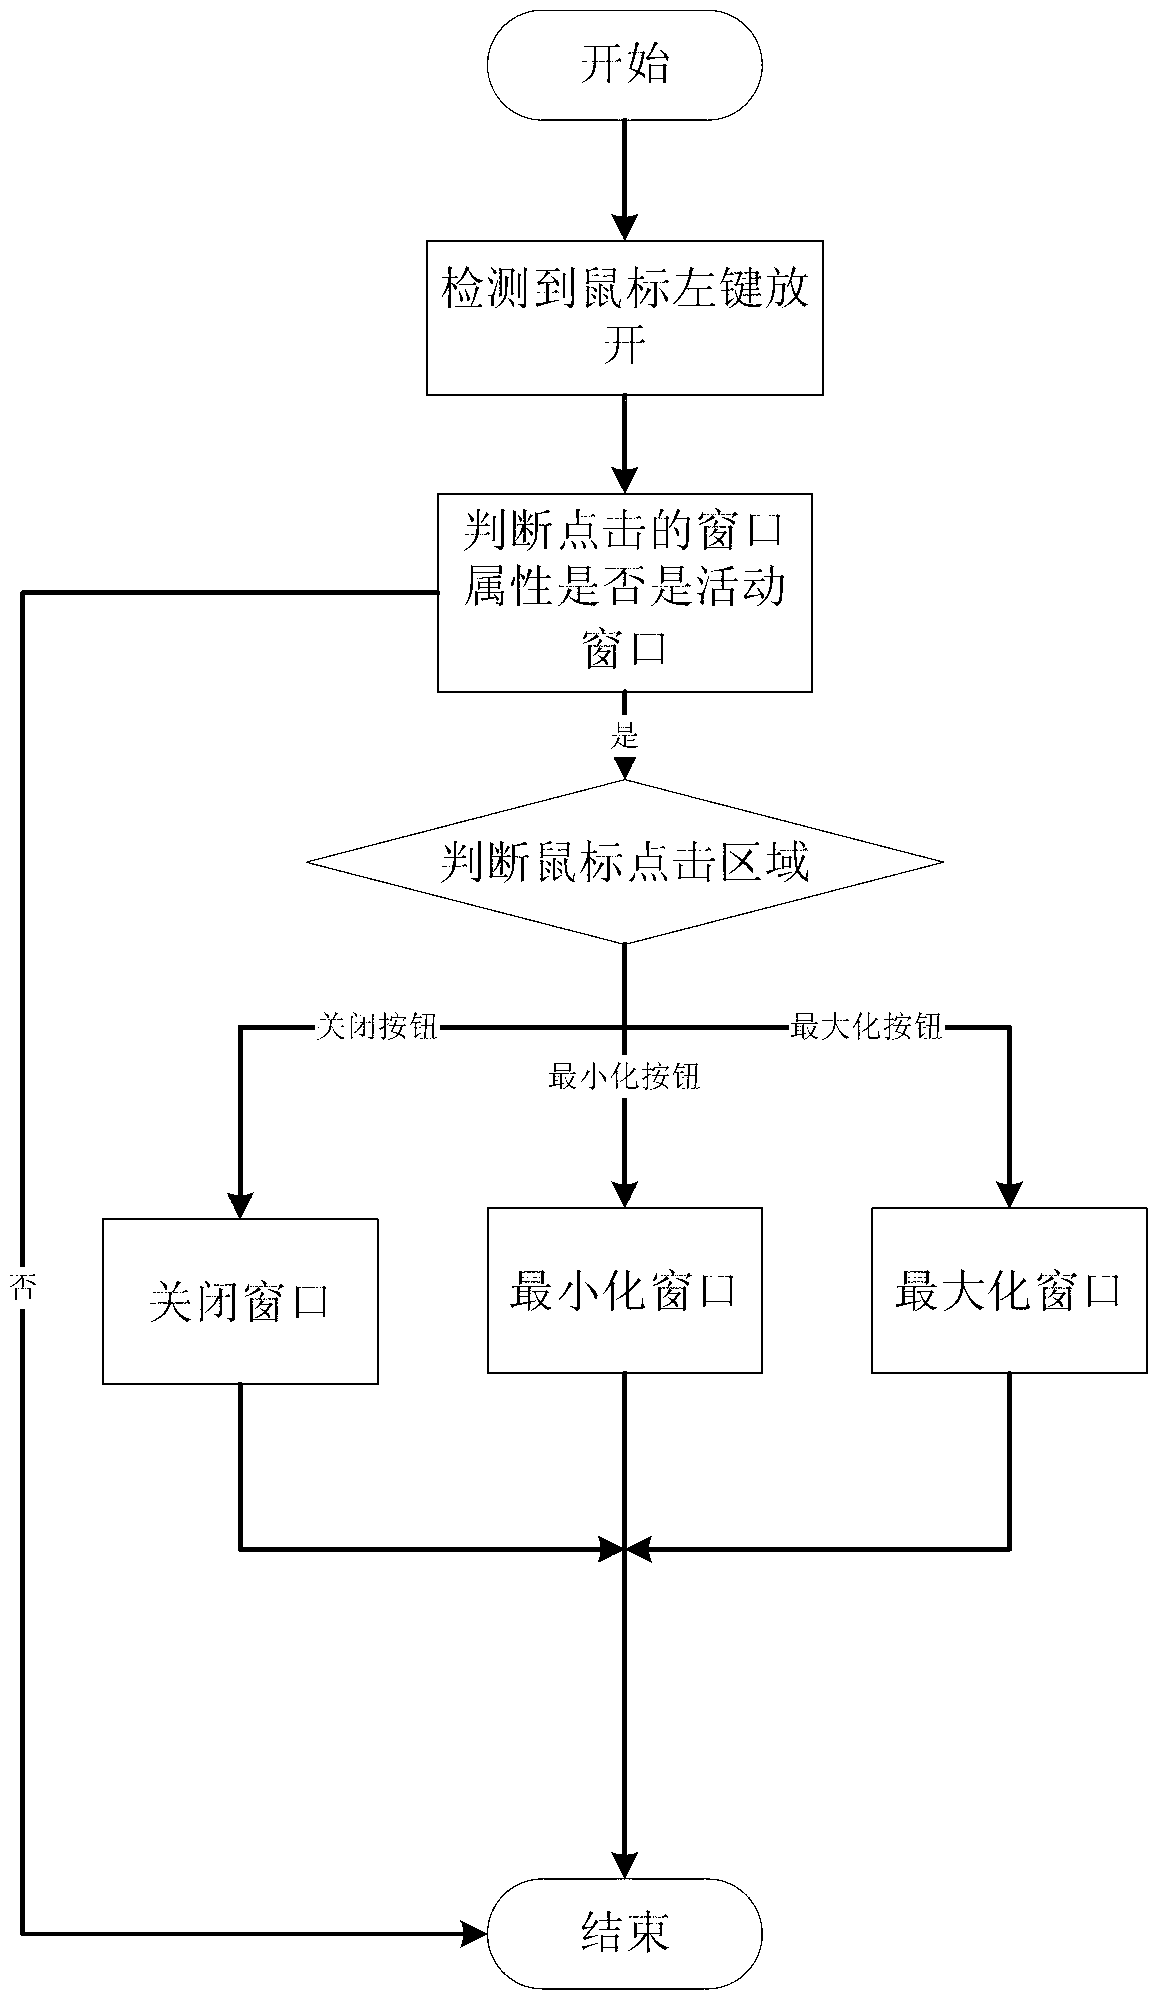 Realization method of desktop system based on Android operation system